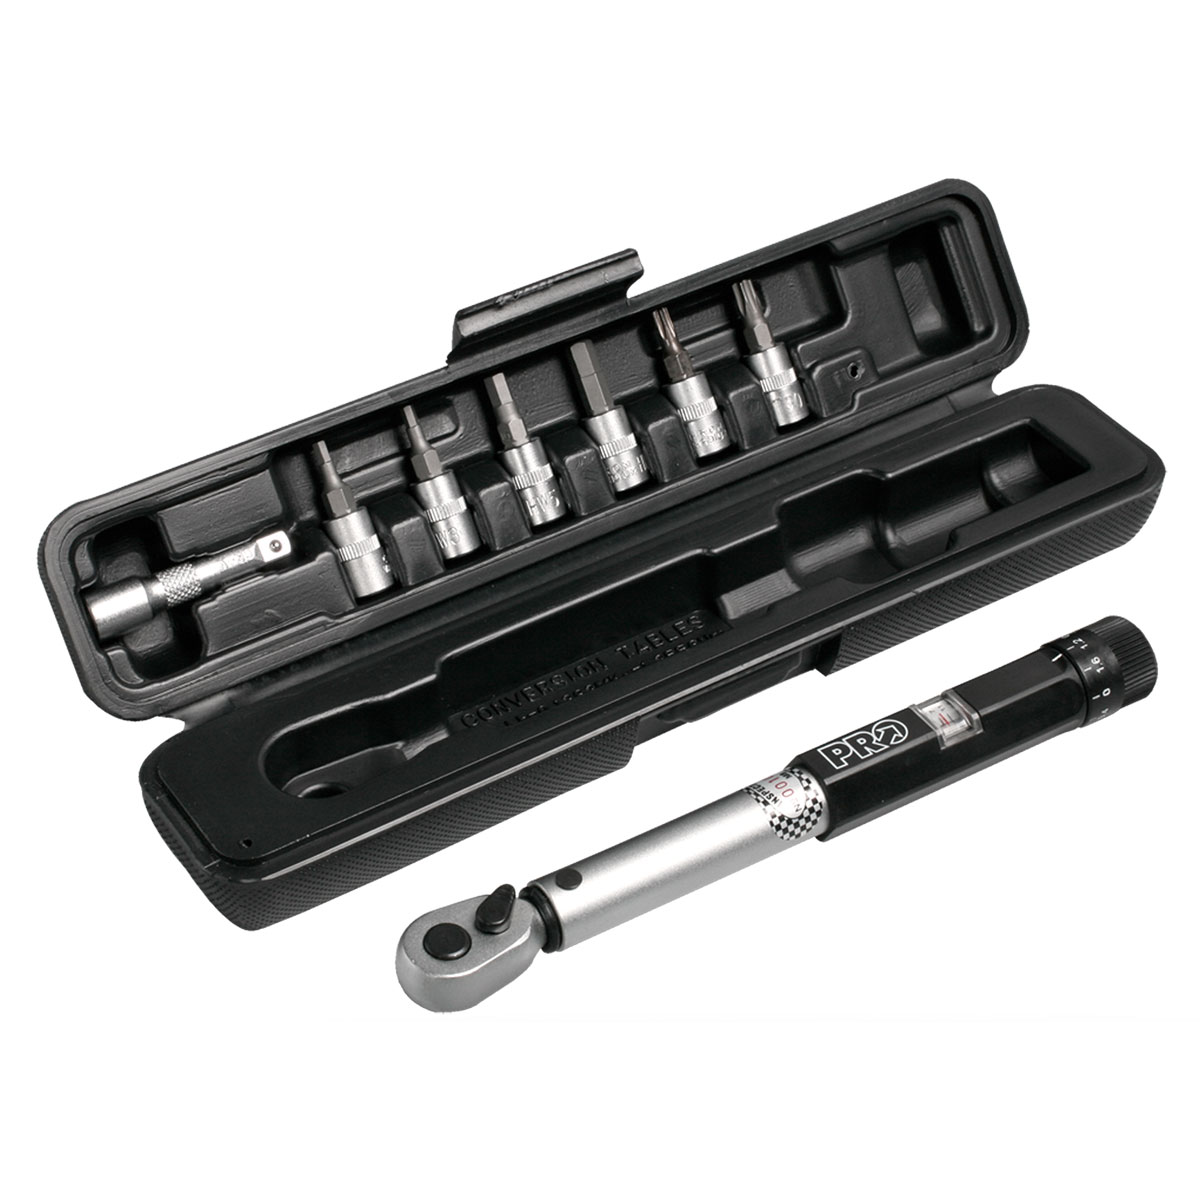 PRO TORQUE WRENCH ADJUSTABLE 3-15NM WITH SOCKETS AND EXTENSION